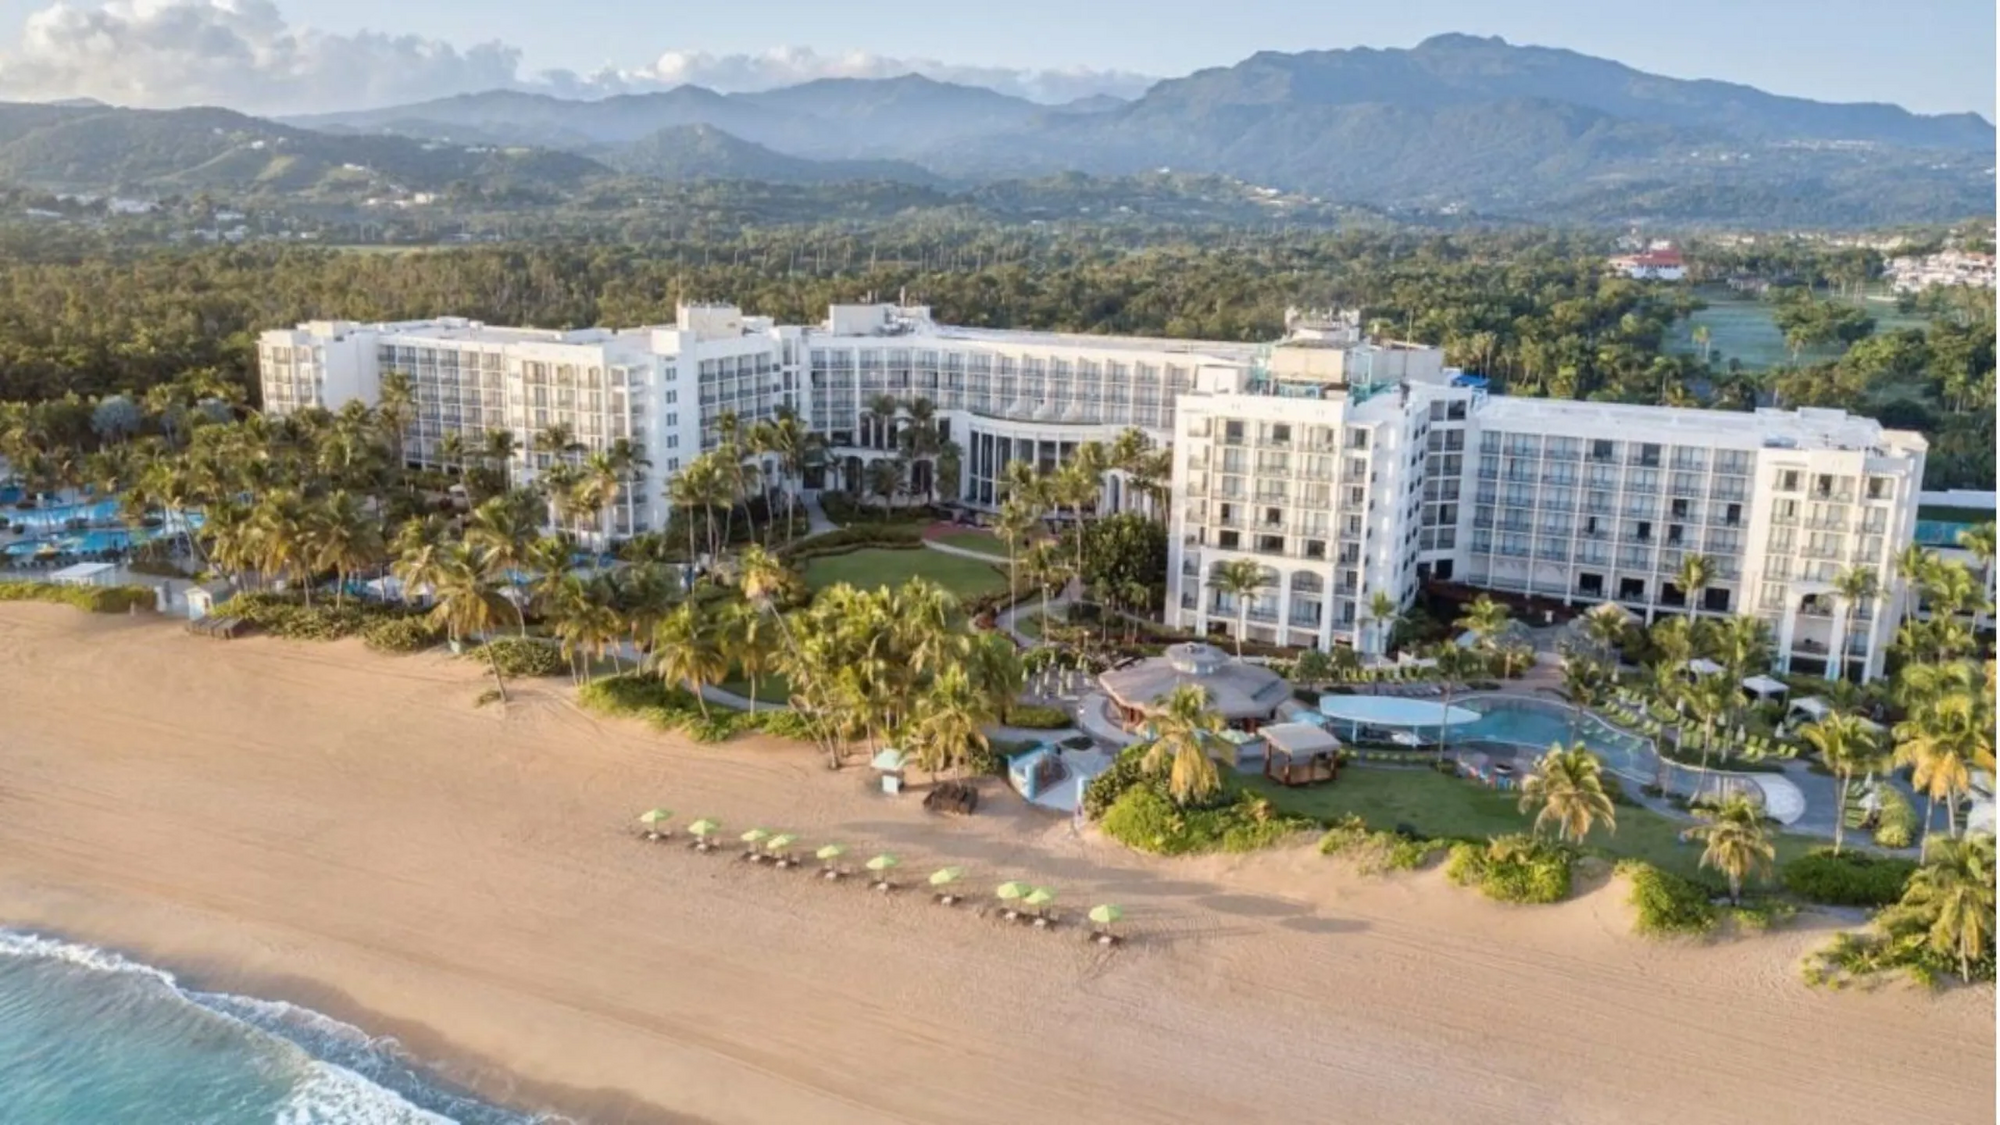 Beaches, surfing, and nature: the best all-inclusive hotels in Puerto Rico